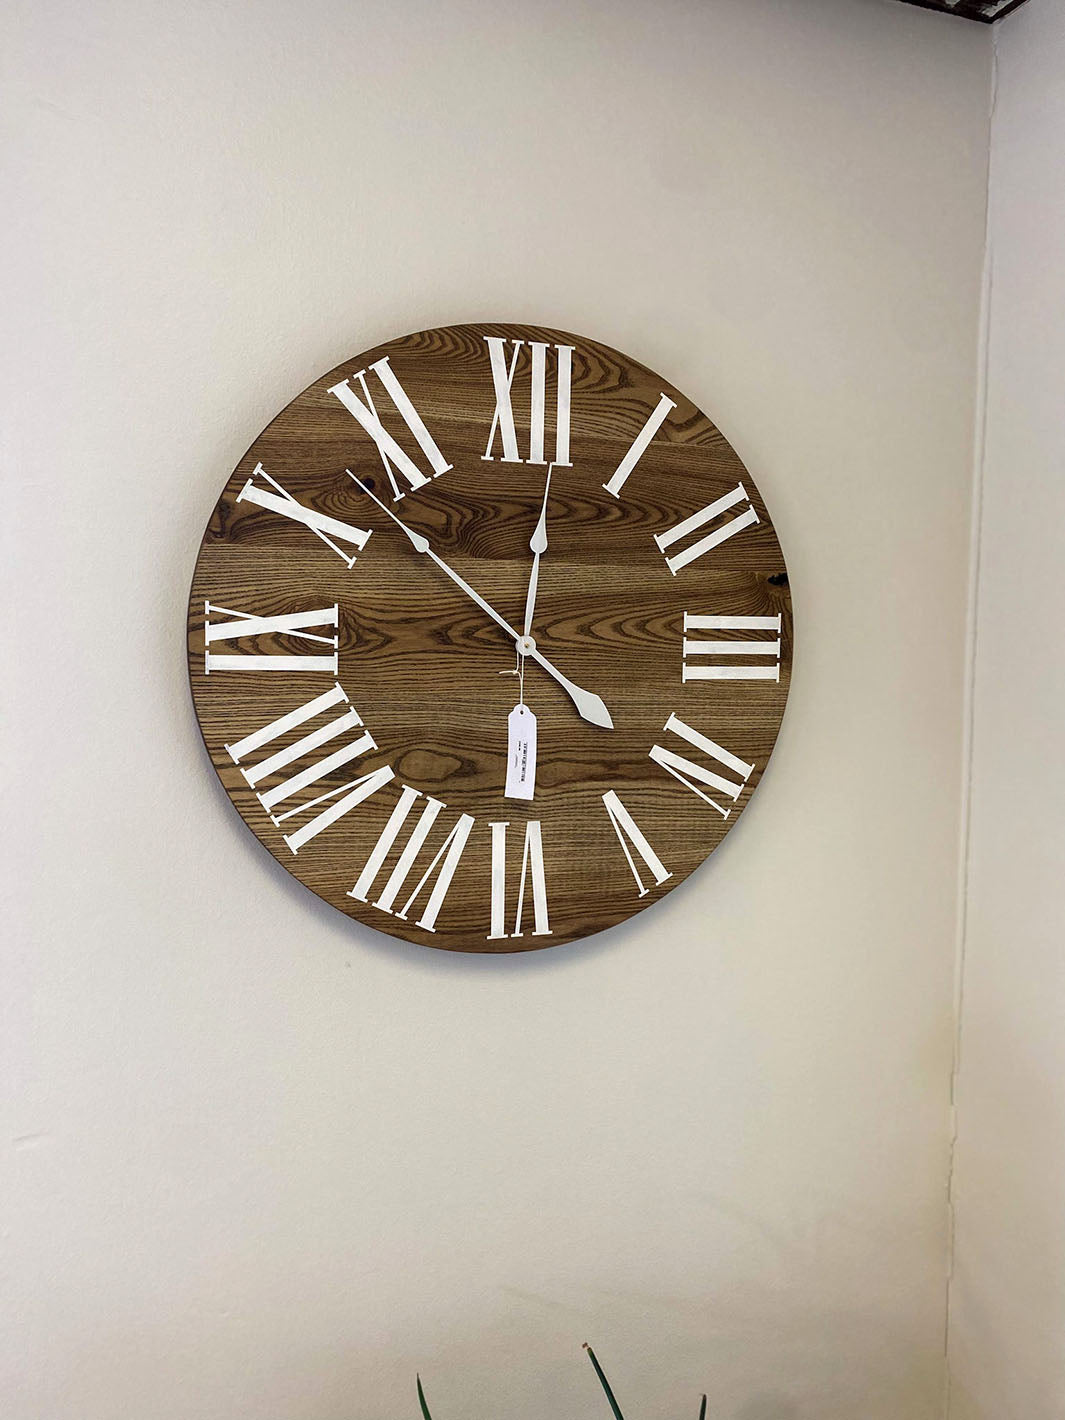 Dark Stained Solid Ash Wood Wall Clock with White Roman Numerals Earthly Comfort Clocks 2051-2